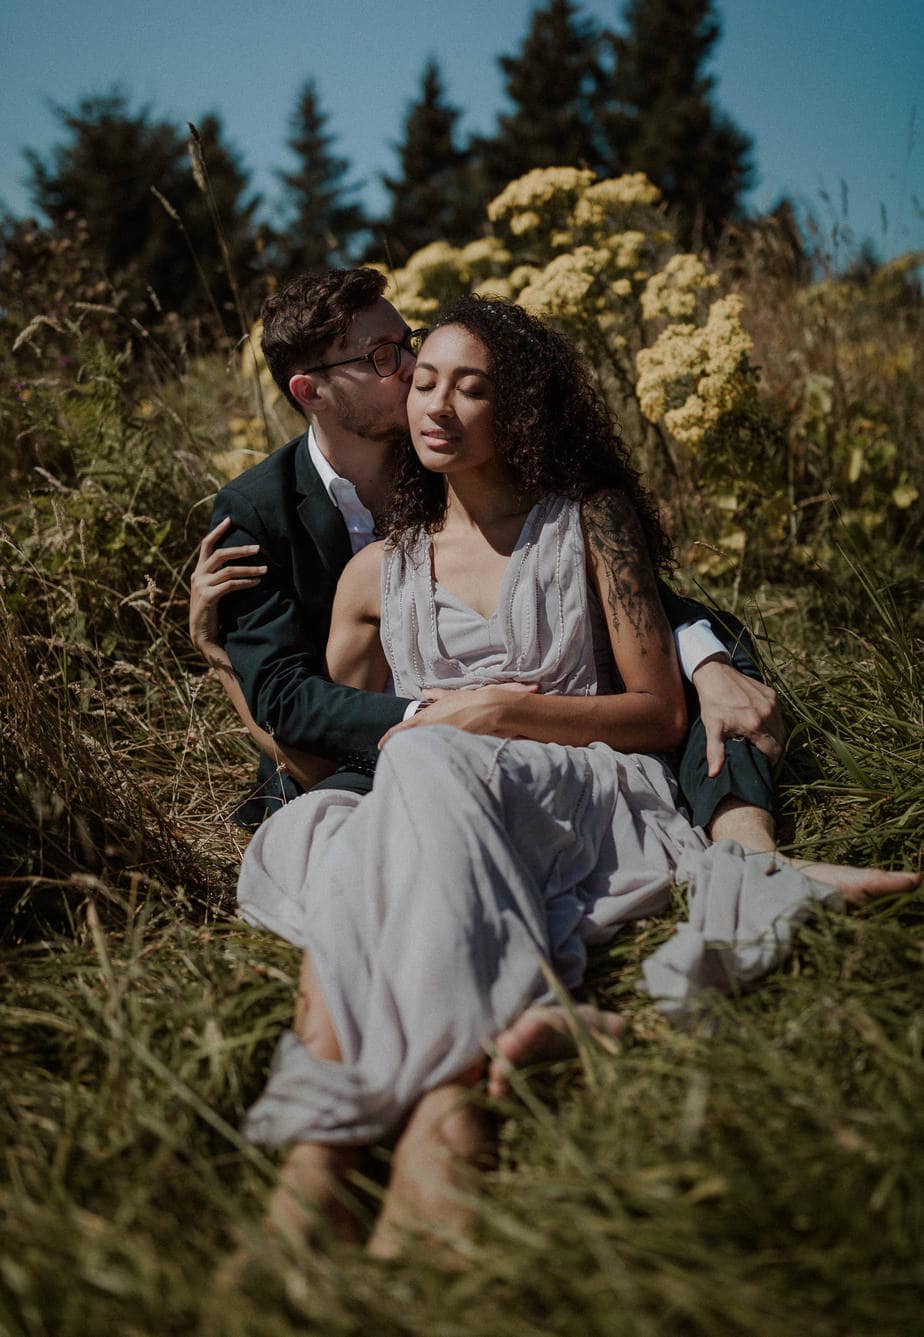 God's Thumb Elopement, Bride and groom sit on the grass surrounded by yellow wildflowers at their God's thumb elopement on the Oregon coast. Bride wears a lavender wedding dress and bare feet. Groom kisses the side of her face